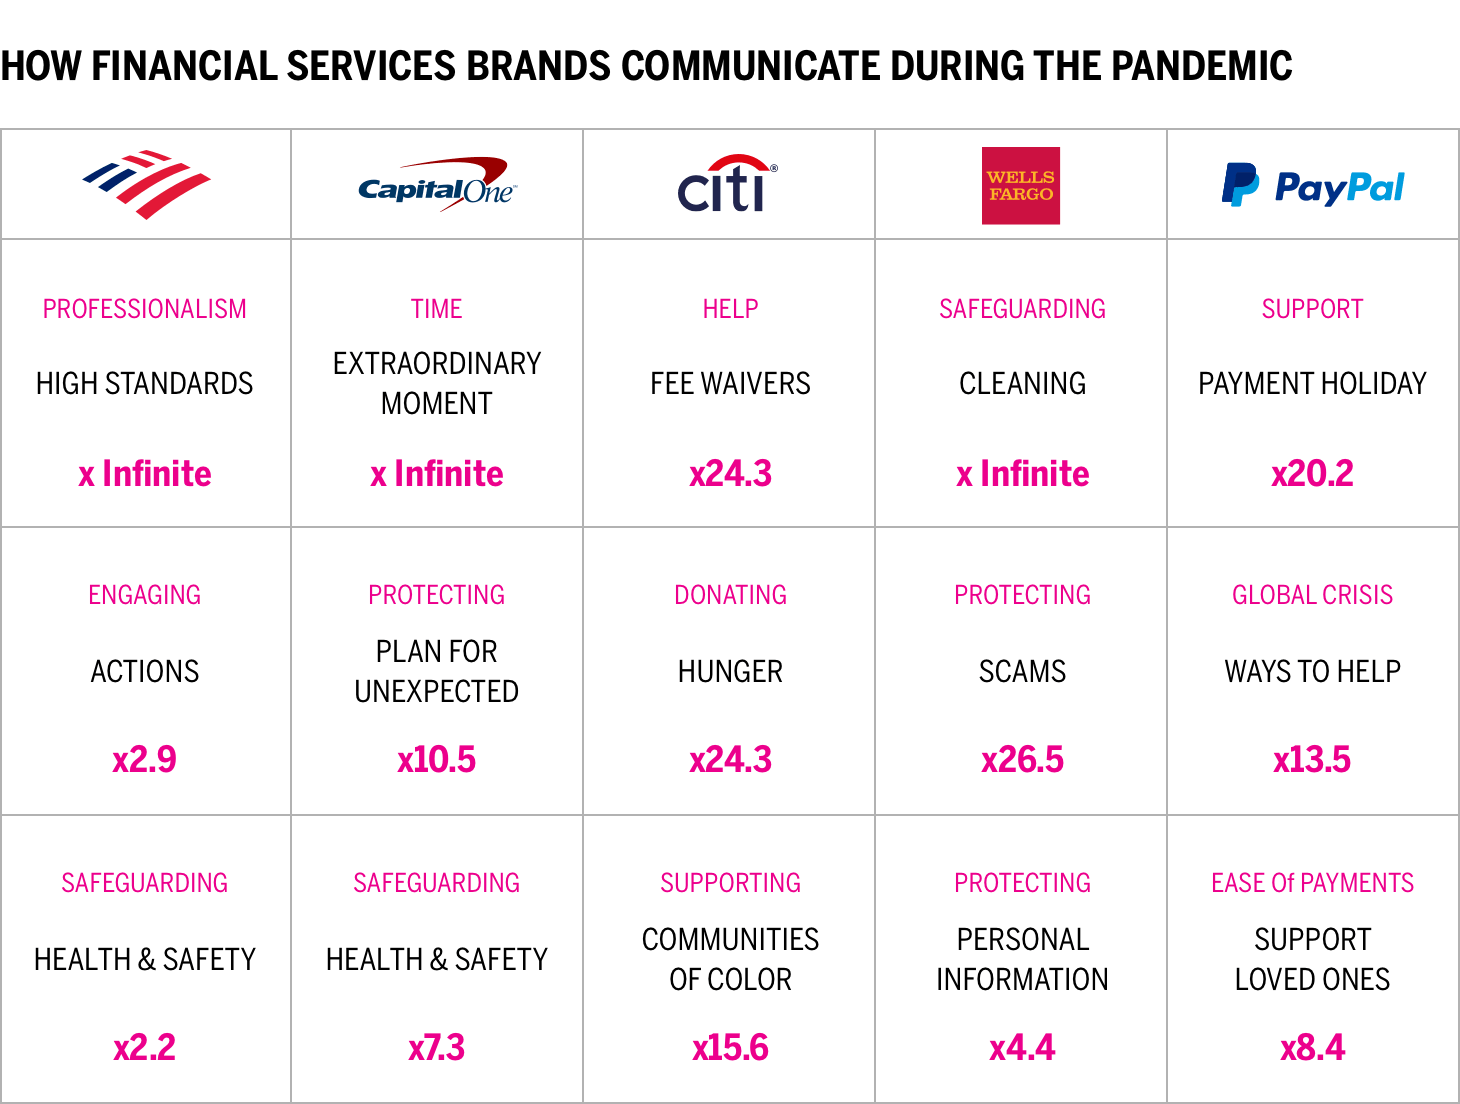 HOW FINANCIAL SERVICES BRANDS COMMUNICATE DURING THE PANDEMIC chart